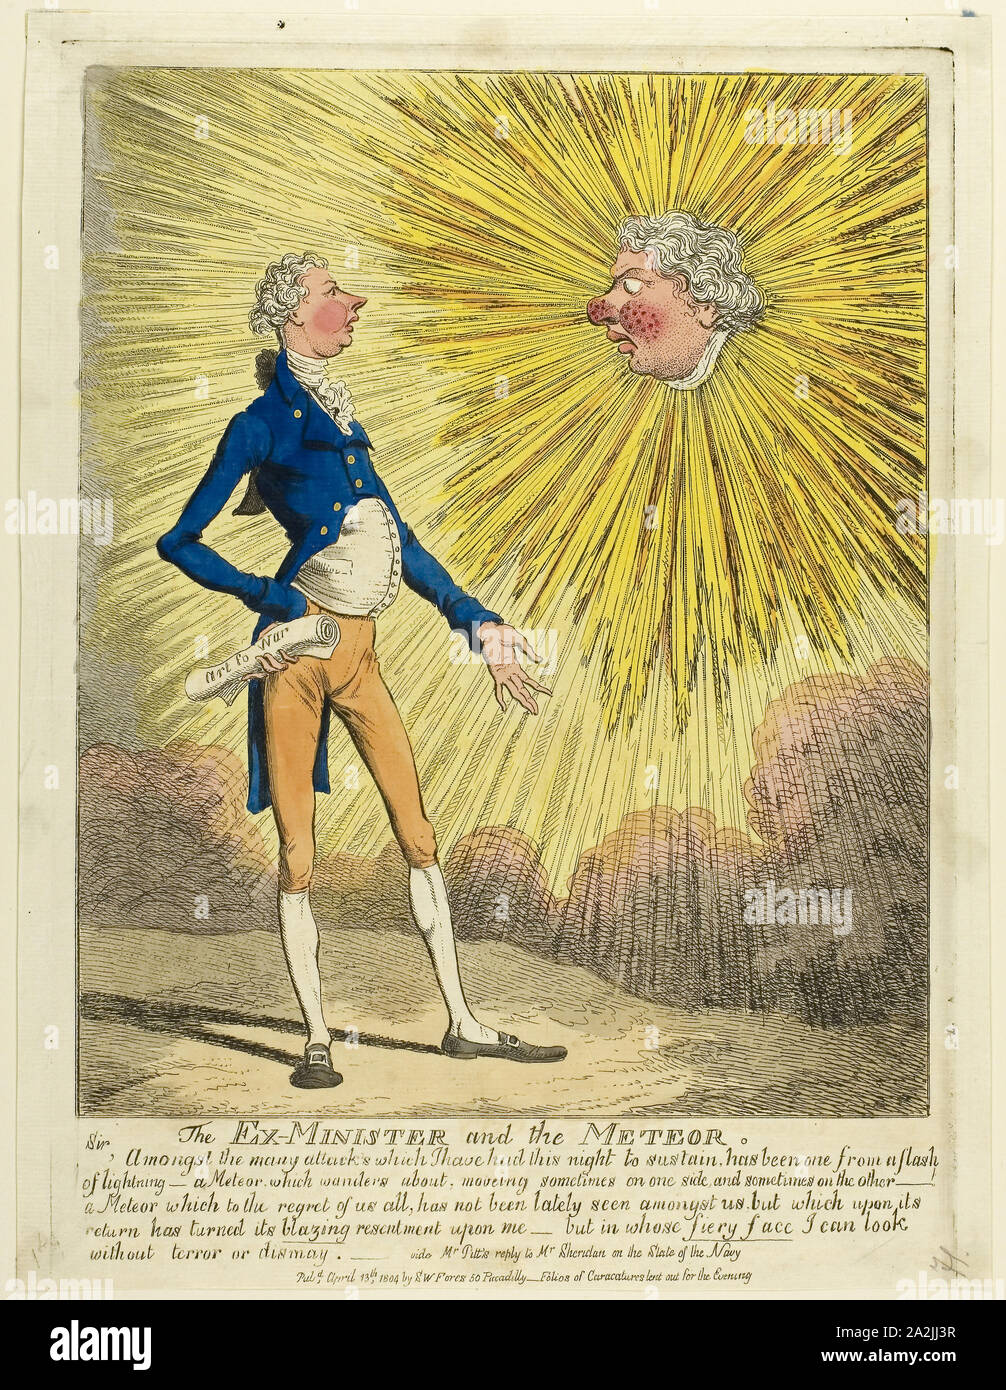 The Ex-Minister and the Meteor, published April 13, 1804, Charles WIlliams (English, active 1797-1830), published by S. W. Fores (English, active 1785-1825), England, Hand-colored etching on ivory laid paper, 288 × 240 mm (image), 343 × 250 mm (plate), 353 × 267 mm (sheet Stock Photo